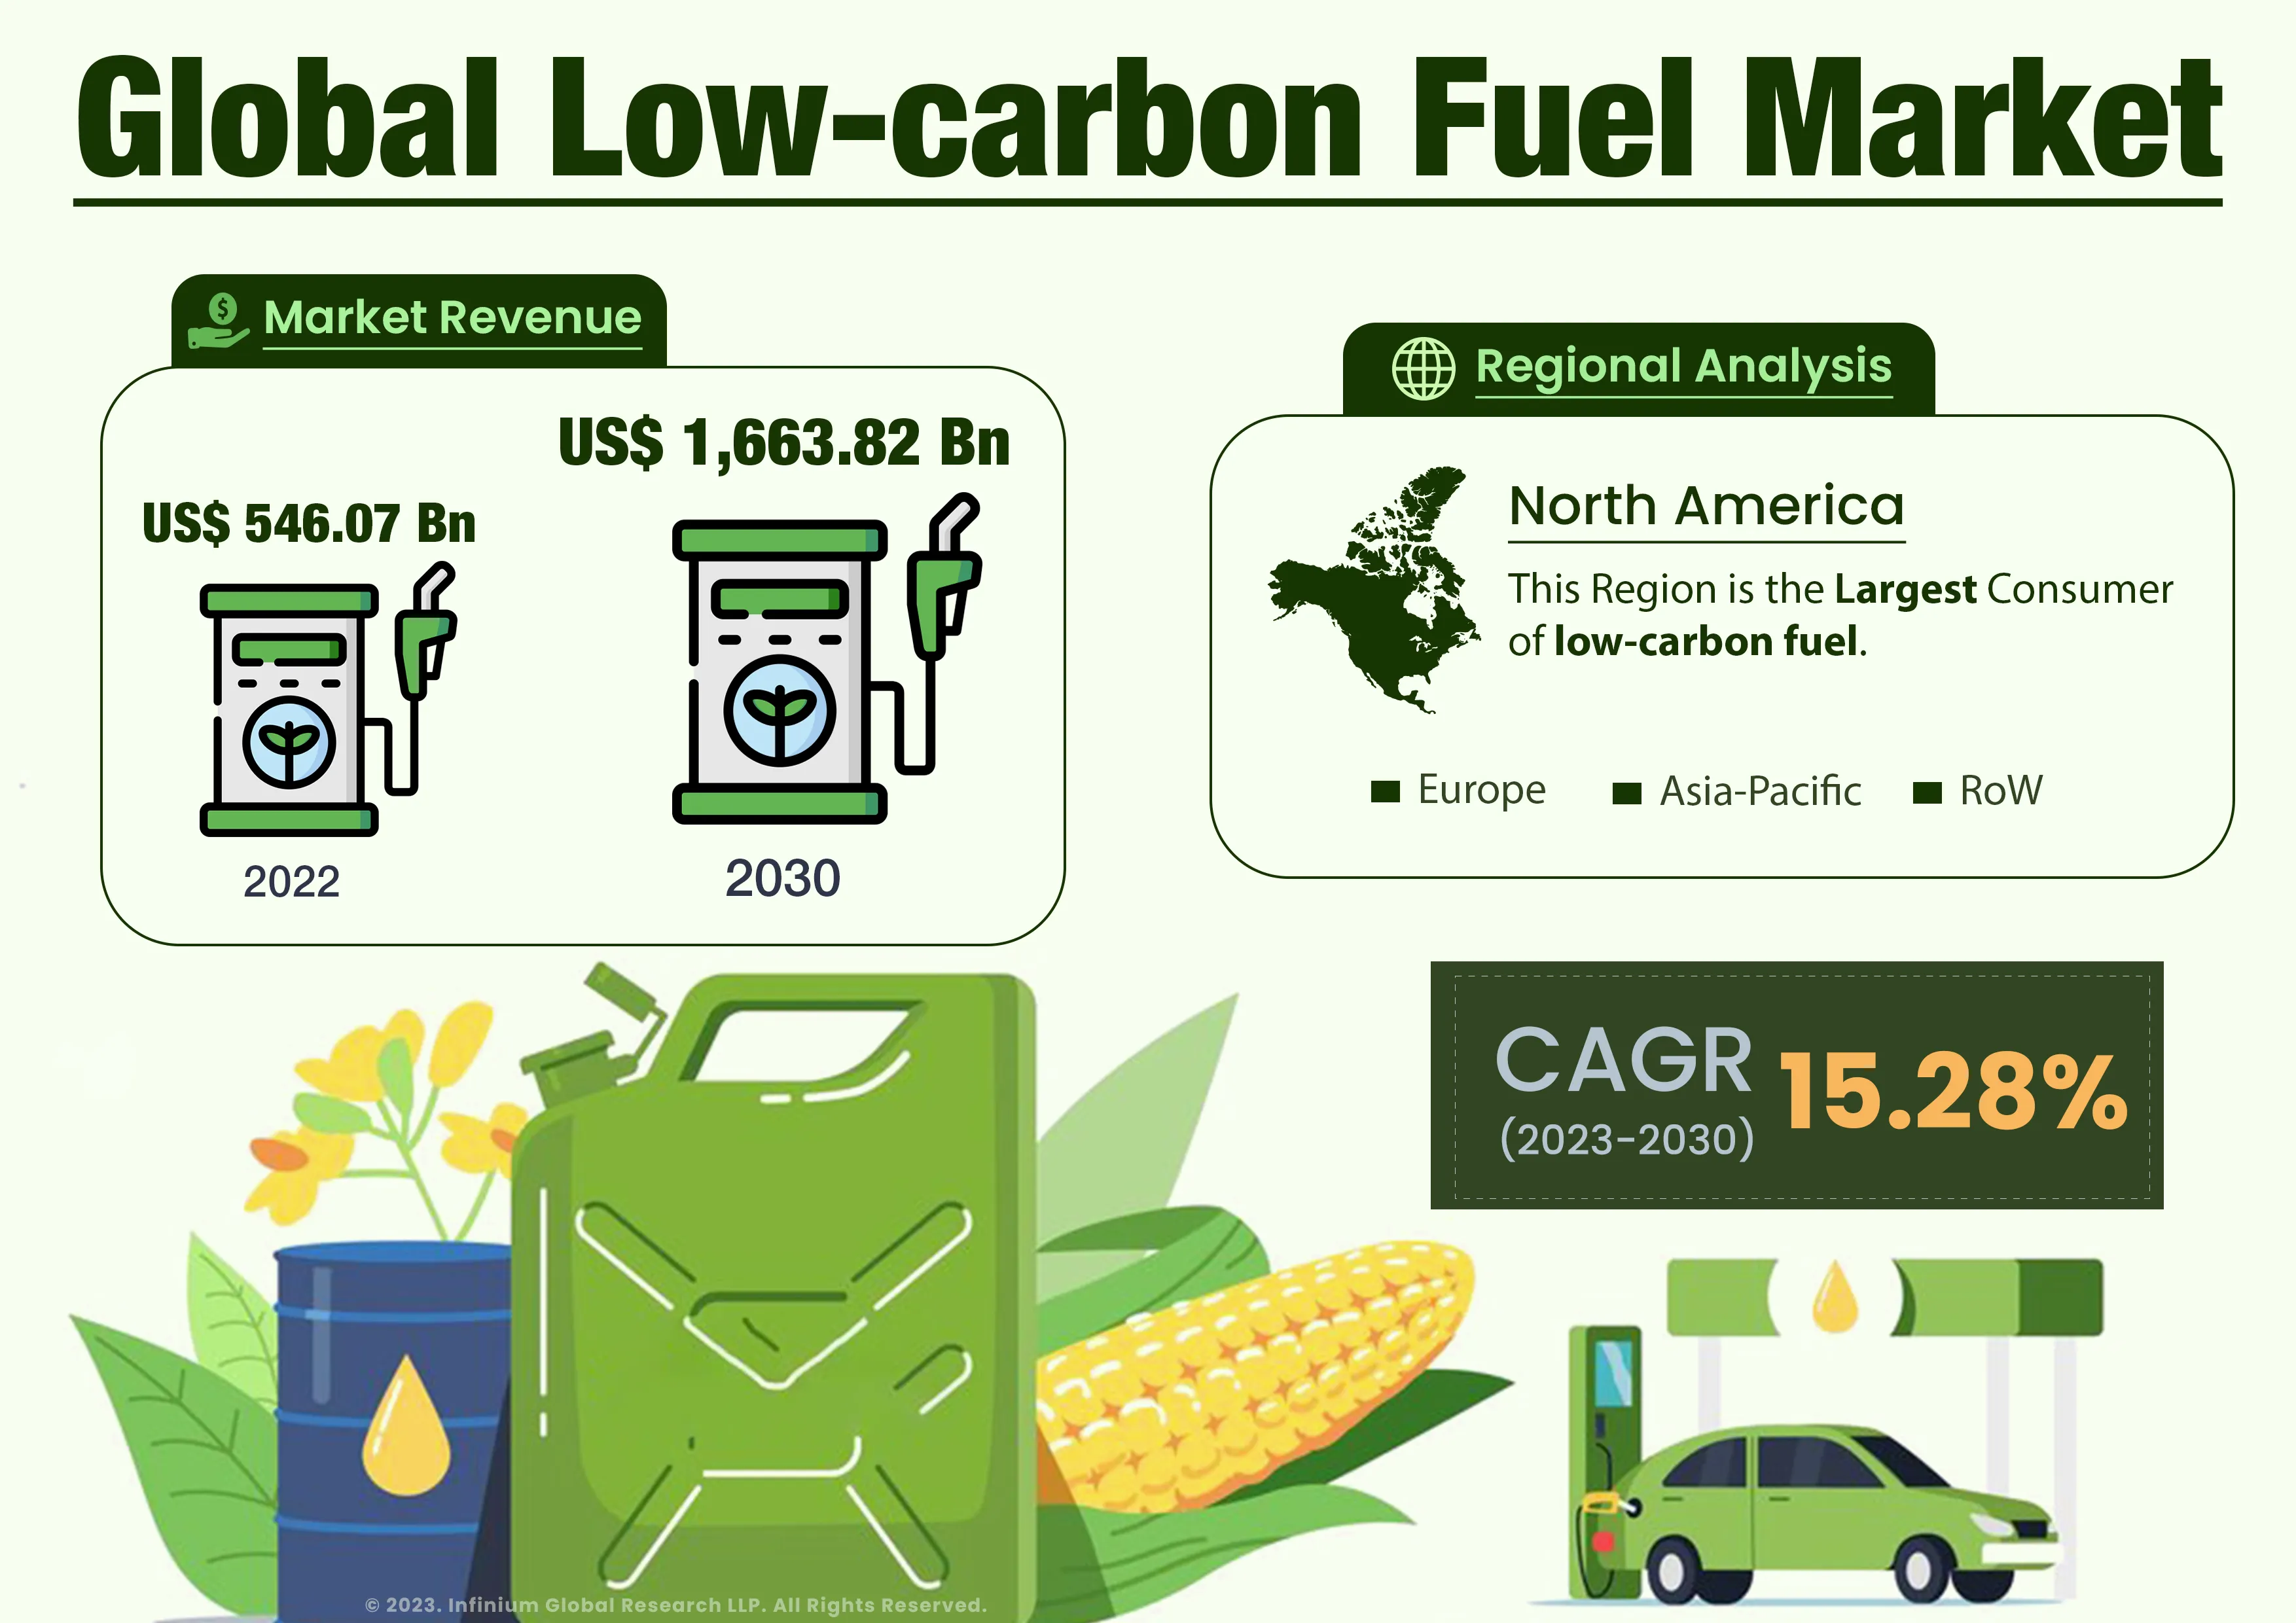 Global Low-carbon Fuel Market was Valued at USD 546.07 Billion in 2022 and is Expected to Reach USD 1,663.82 Billion by 2030 and Grow at a CAGR of 15.28% Over the Forecast Period.